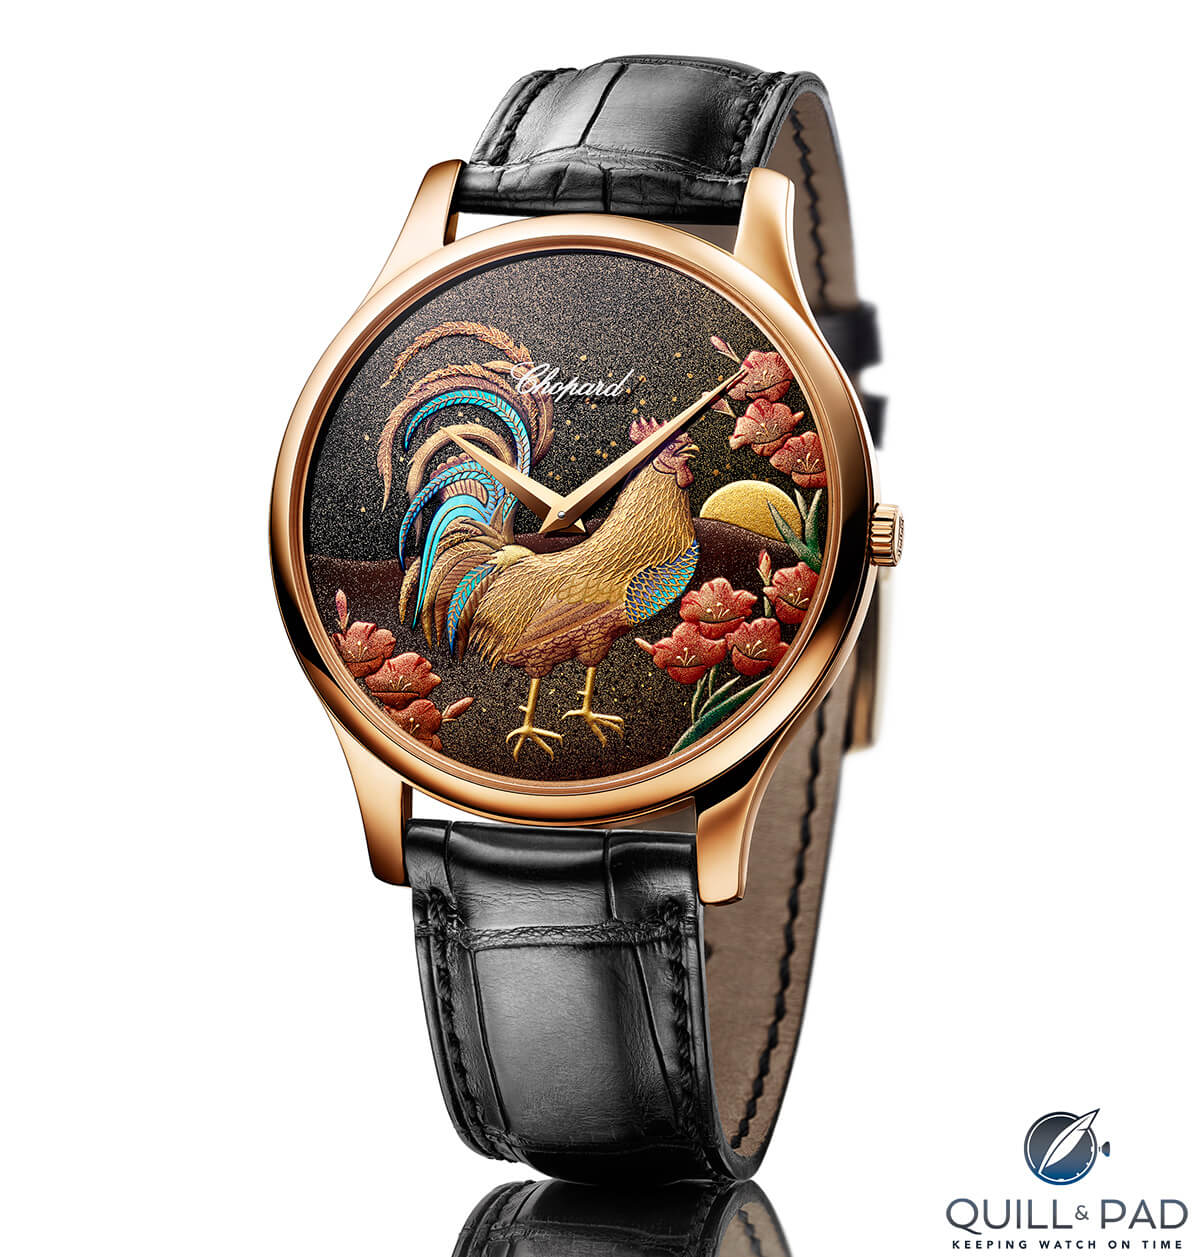 Chopard L.U.C XP Urushi Year of the Rooster